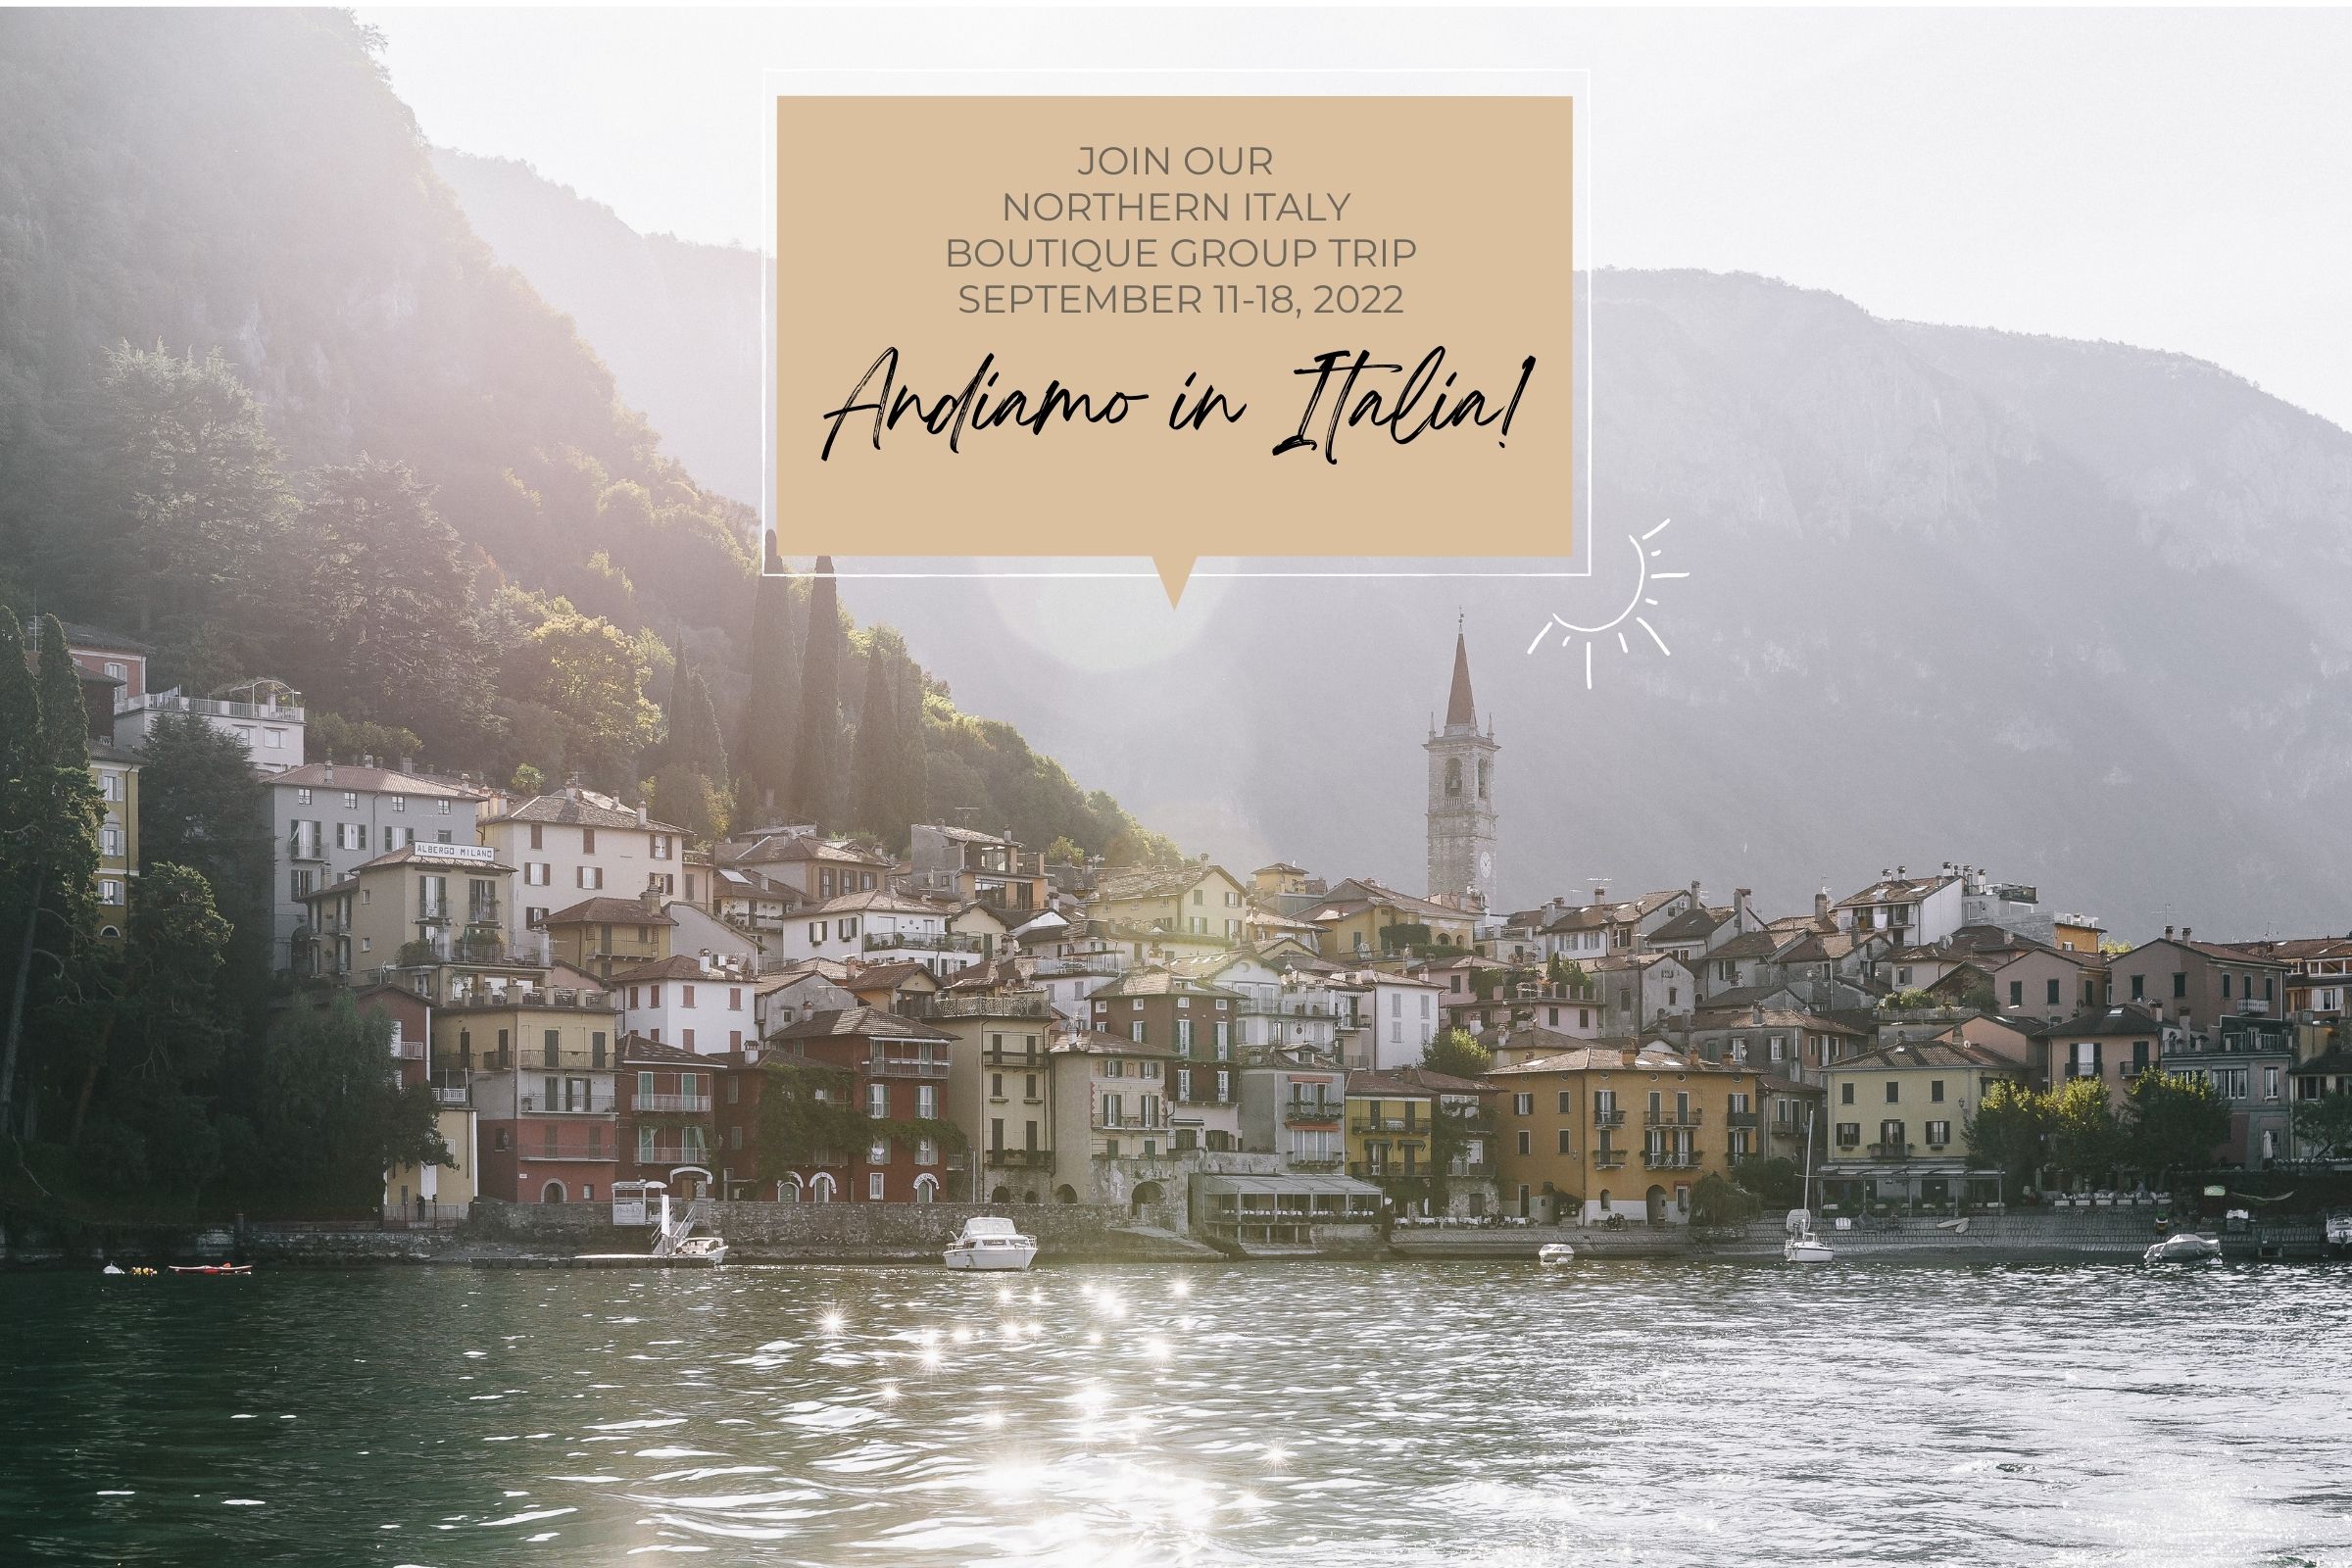 2022 Northern Italy Boutique Group Trip